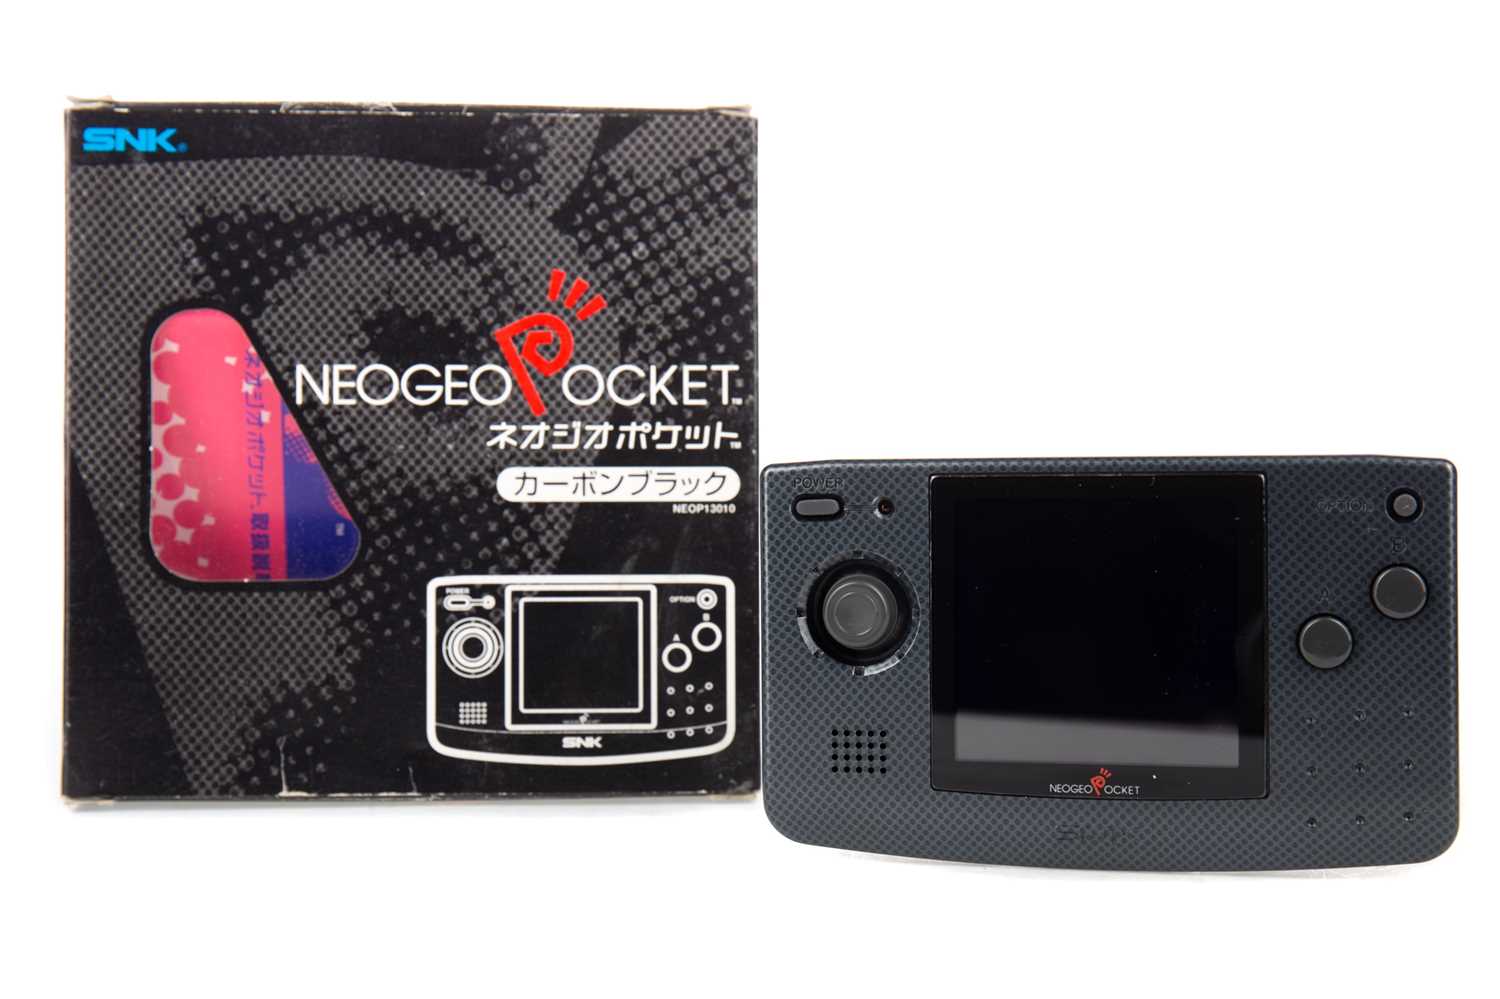 Lot 1021 - AN SNK NEO GEO POCKET CONSOLE